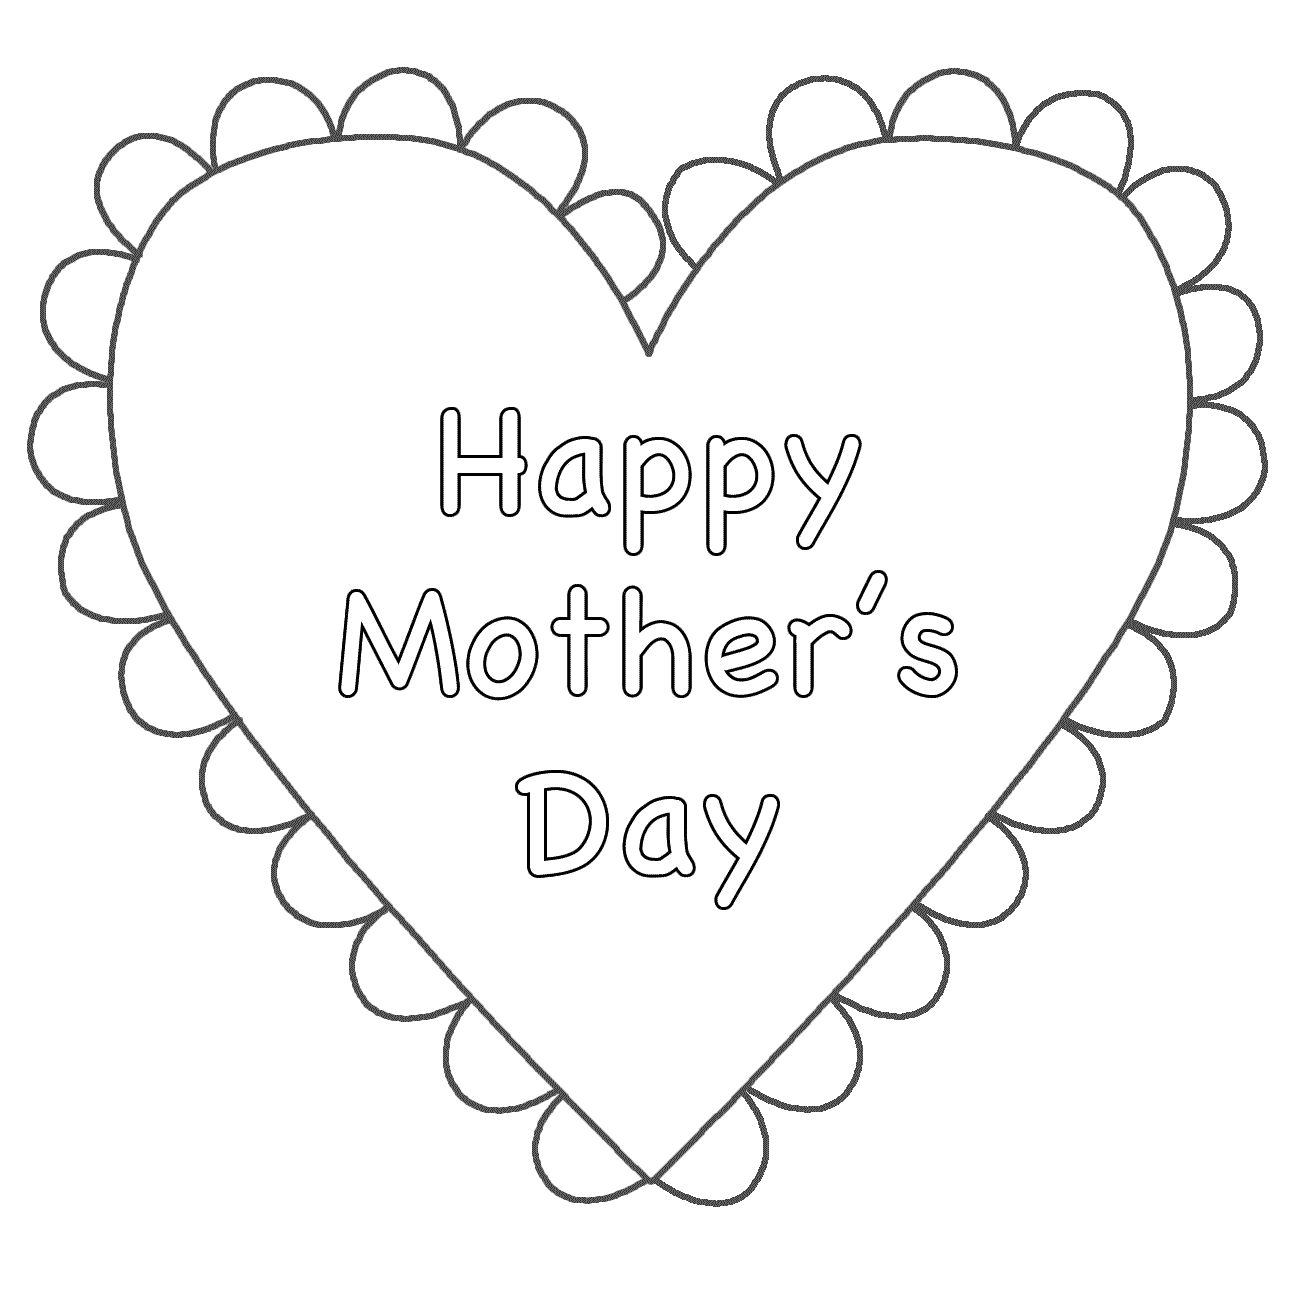 30 Free And Printable Mother’s Day Coloring Cards - Kitty Baby Love